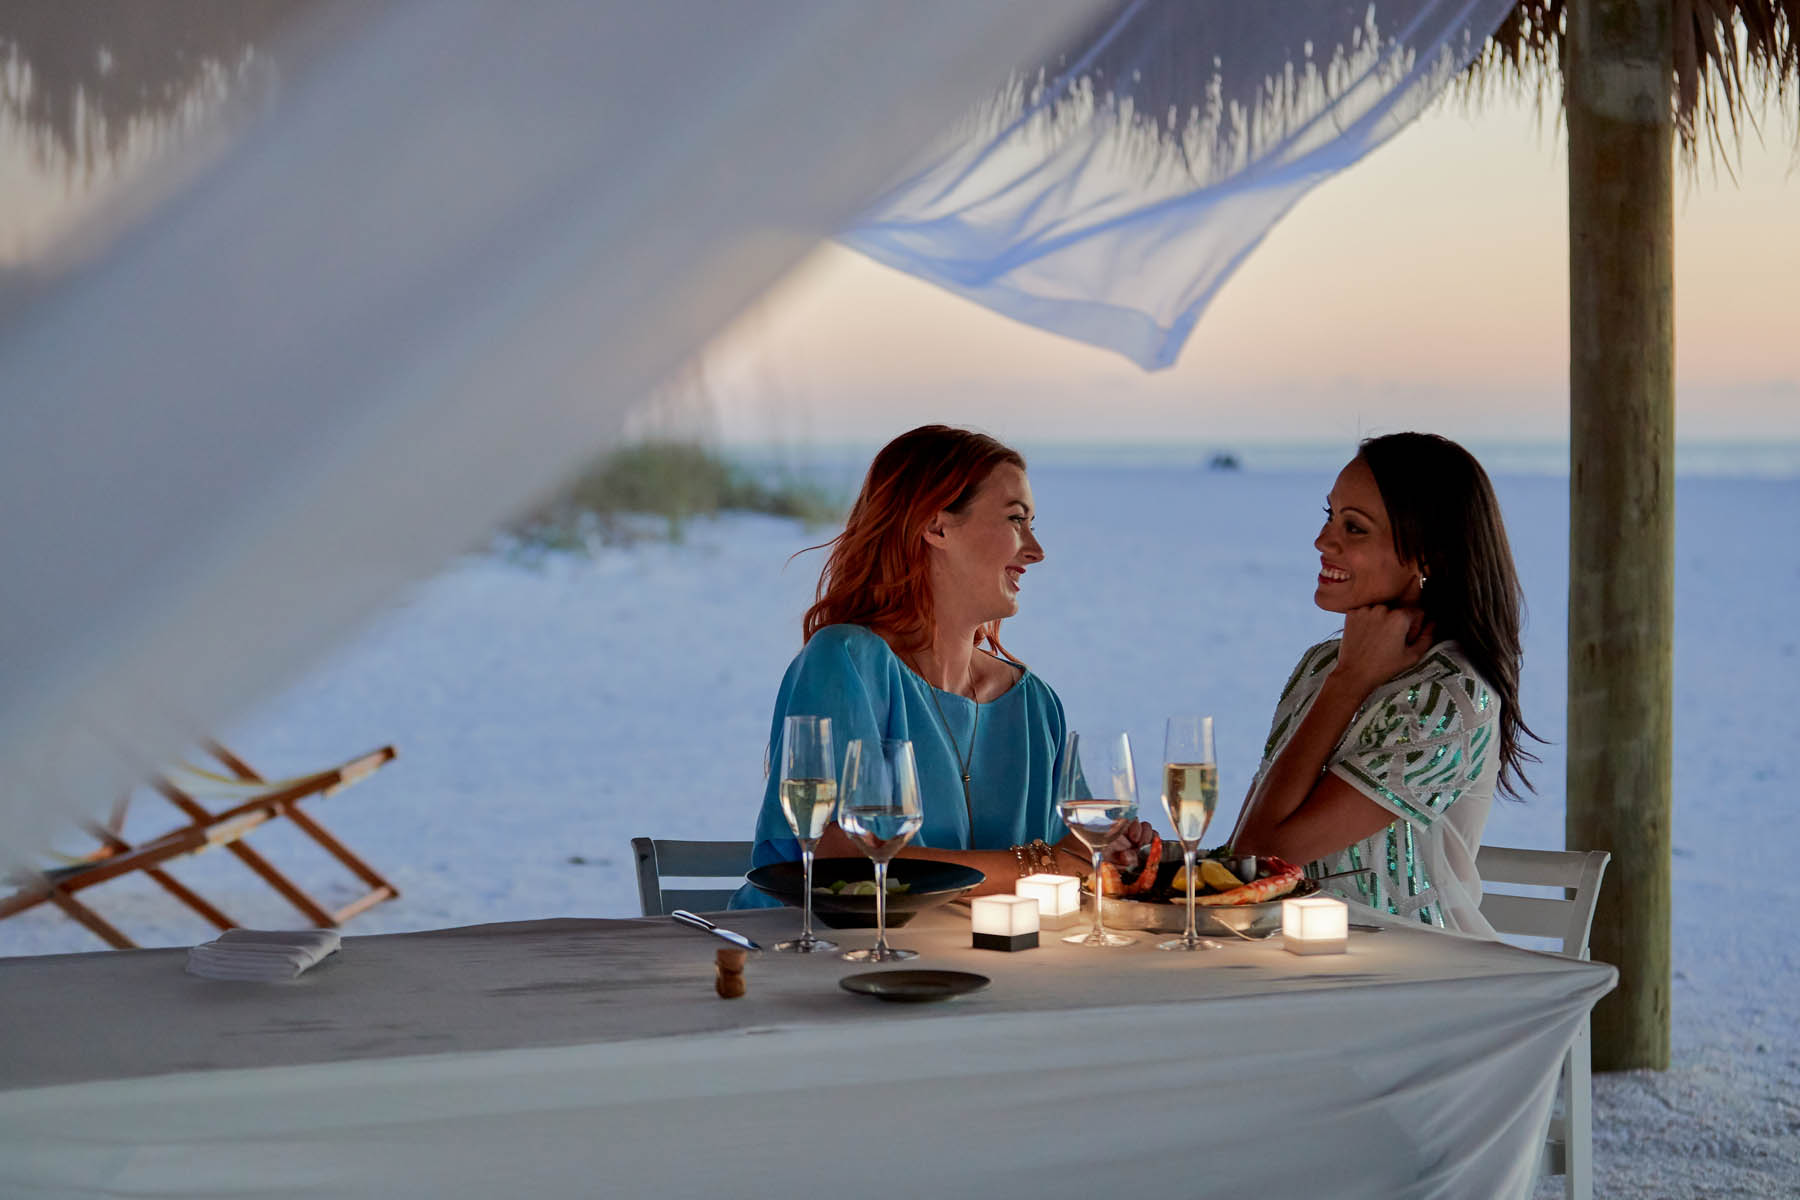 Two people with long hair sit under a beach cabana and enjoy a candlelit dinner.